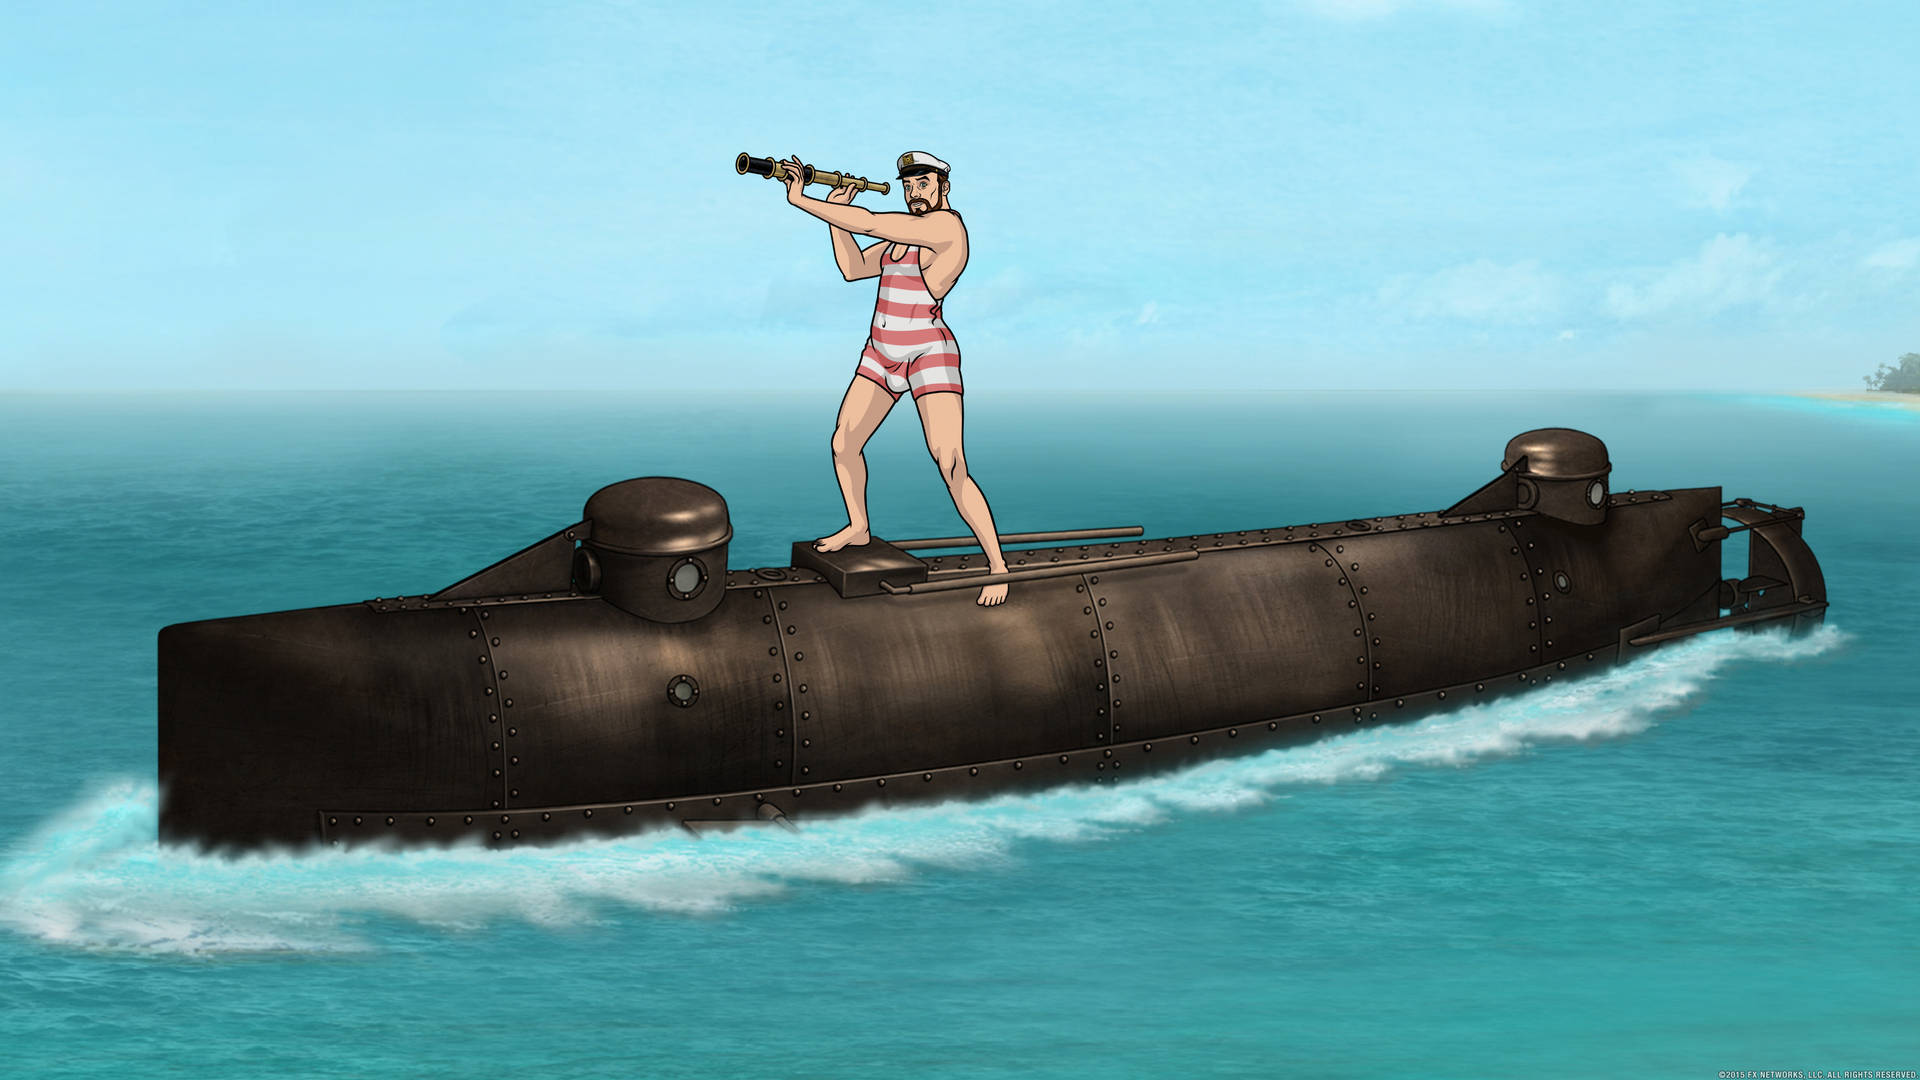 Eccentric Spy Sterling Archer with Dr. Krieger Aboard a Submarine Wallpaper